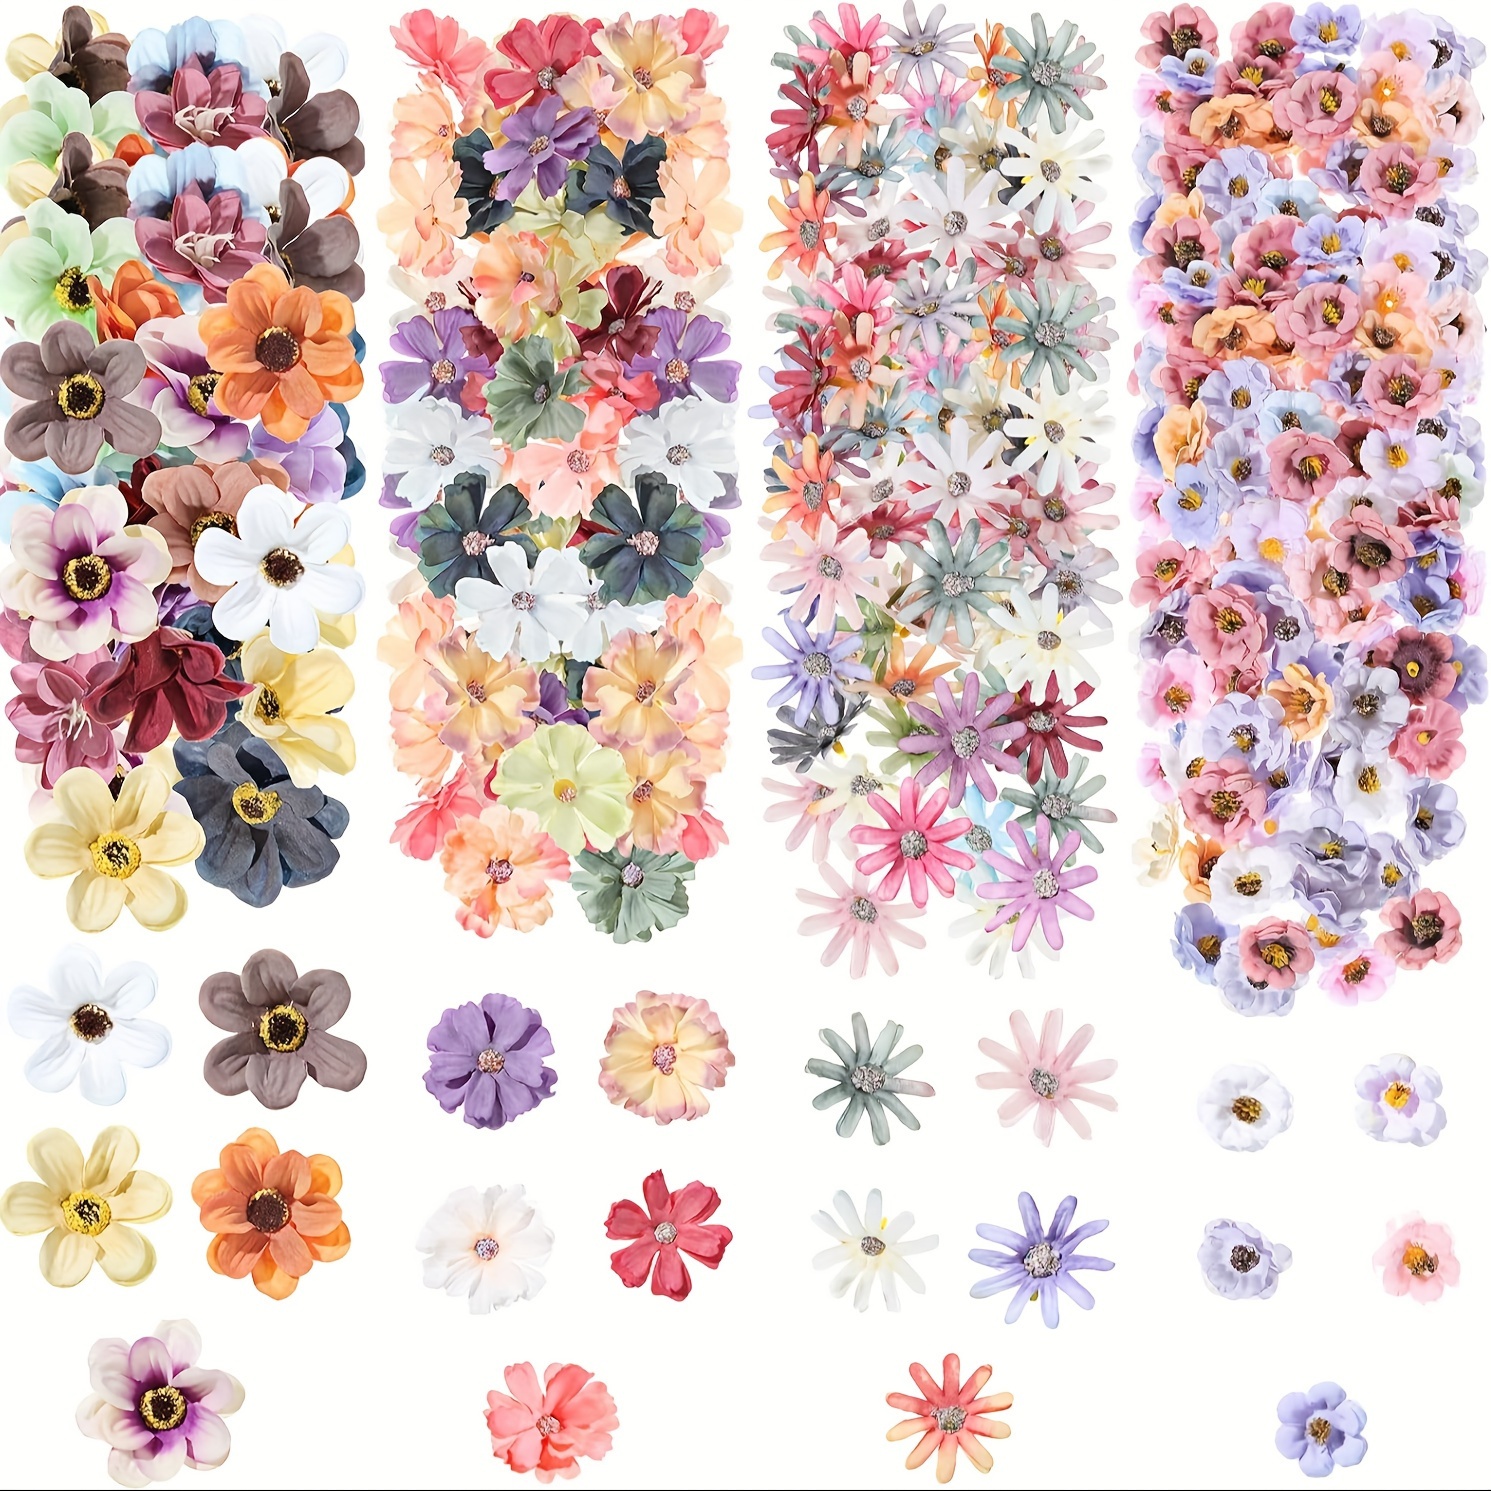 

50/100 Pieces Flower Mini Silk Heads Fake Rose Daisy Faux Flowers For Crafts Rose Flowers Plum Heads Sunflower Daisy Wedding Decoration For Halloween Home Wedding, 2-4 Cm (assorted Colors)